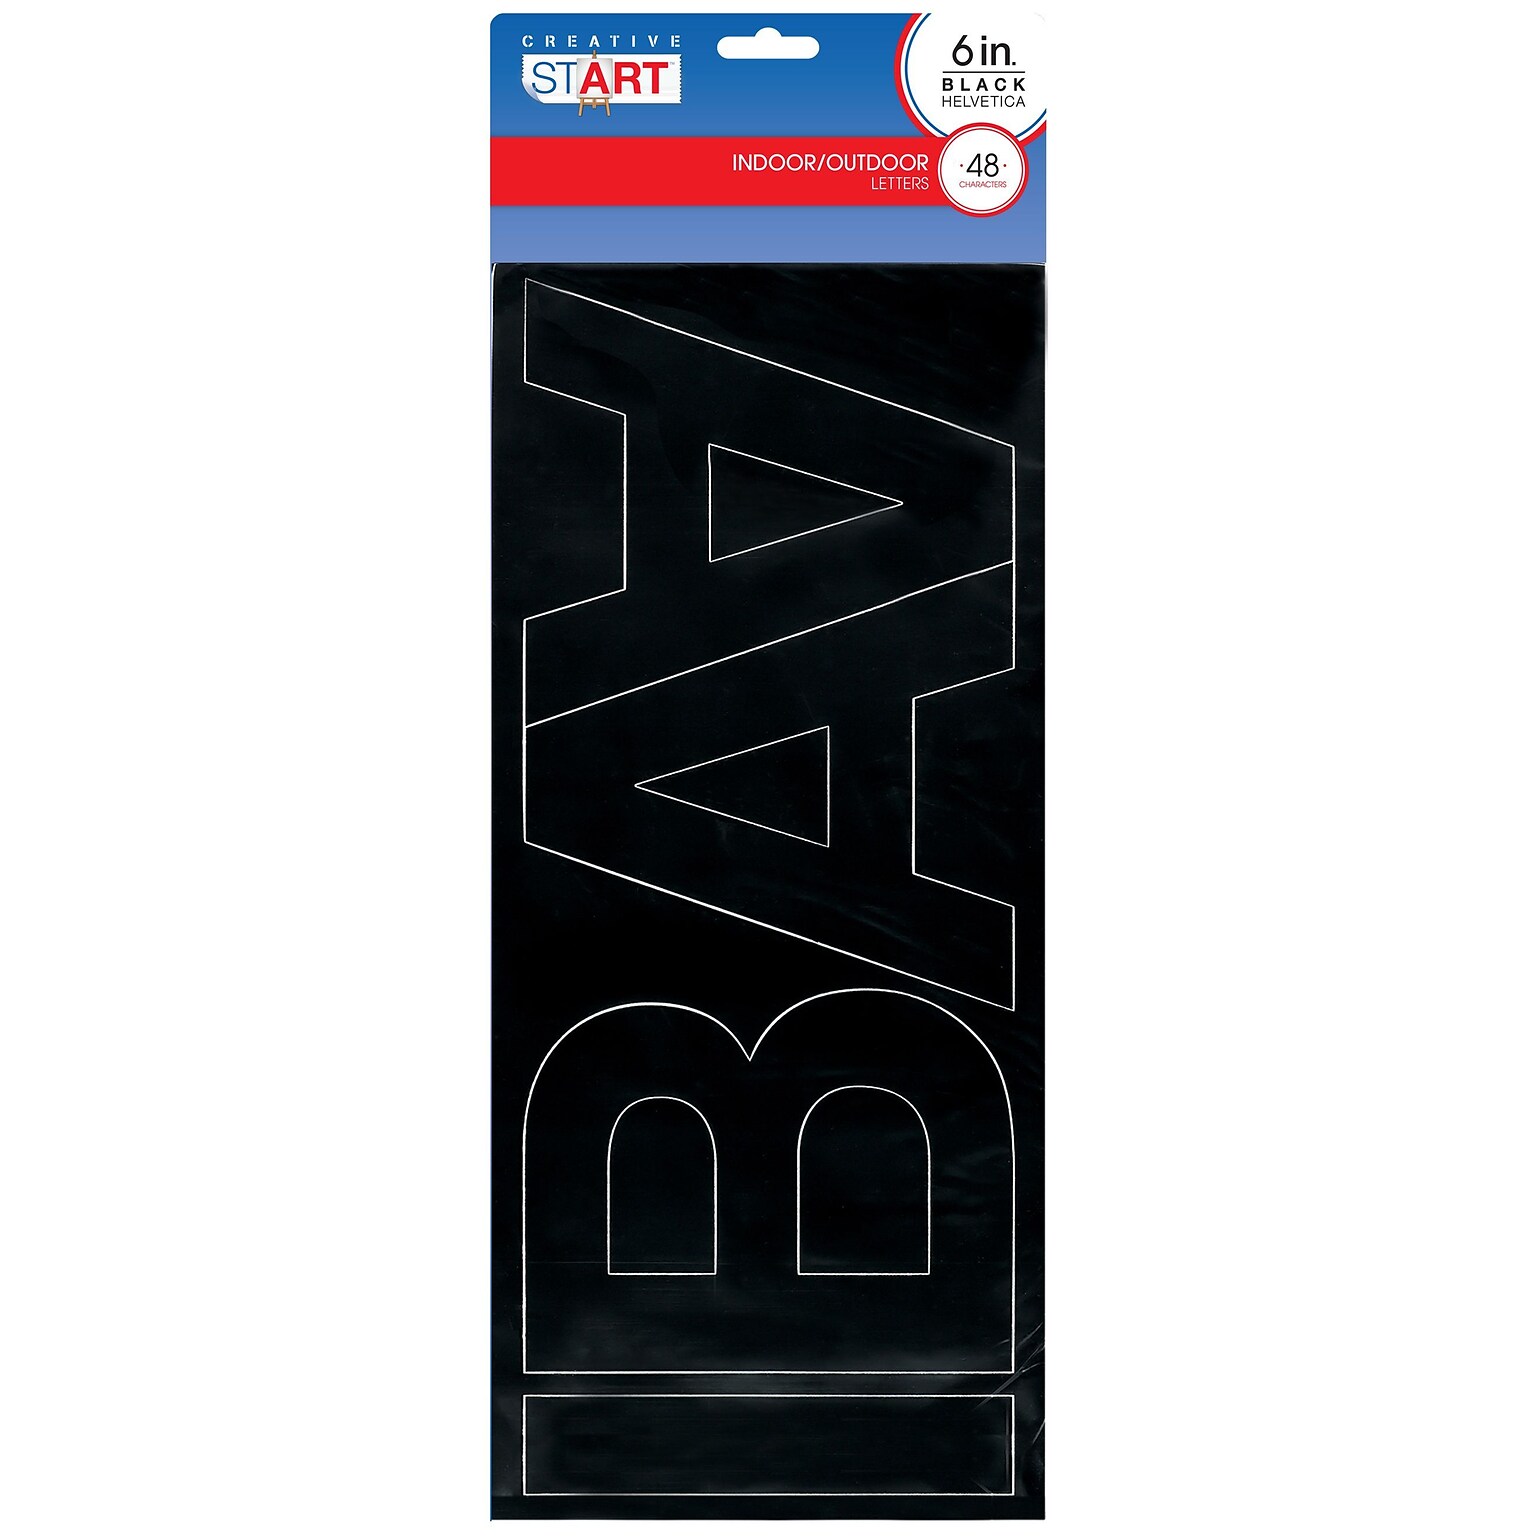 Creative Start Self-Adhesive 6H Letters Black, 96 Count, 2 Pack (098145PK2)